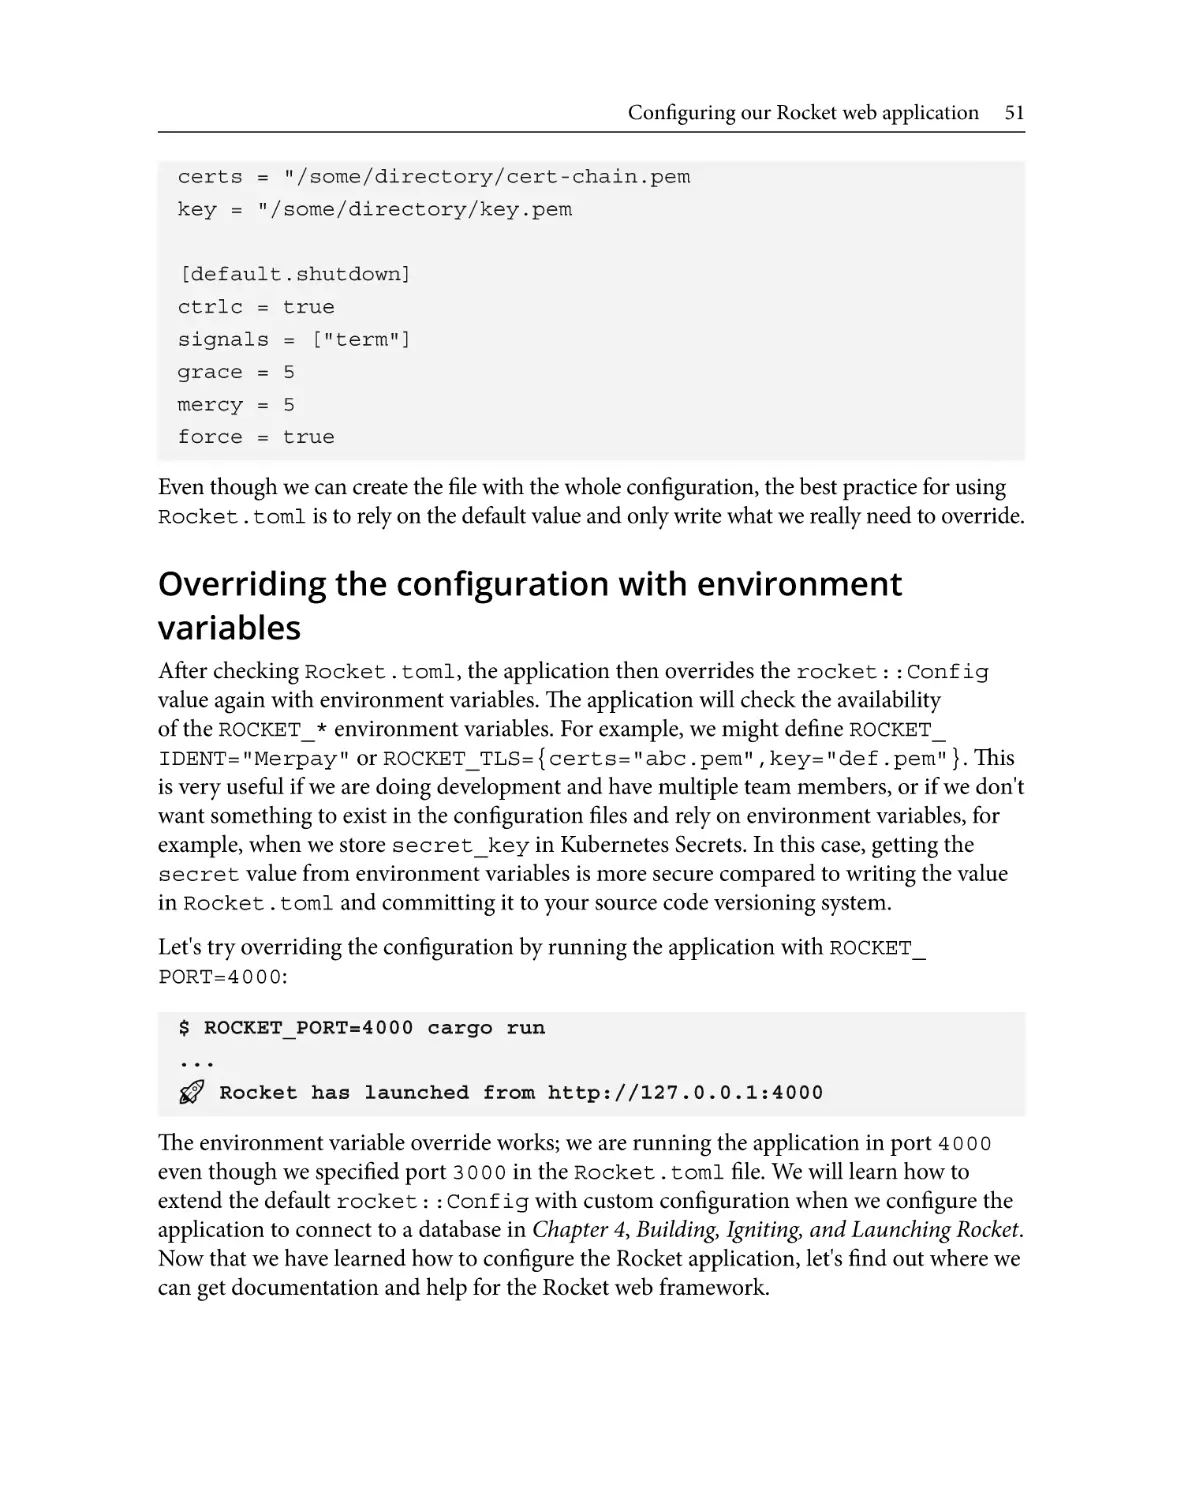 Overriding the configuration with environment variables